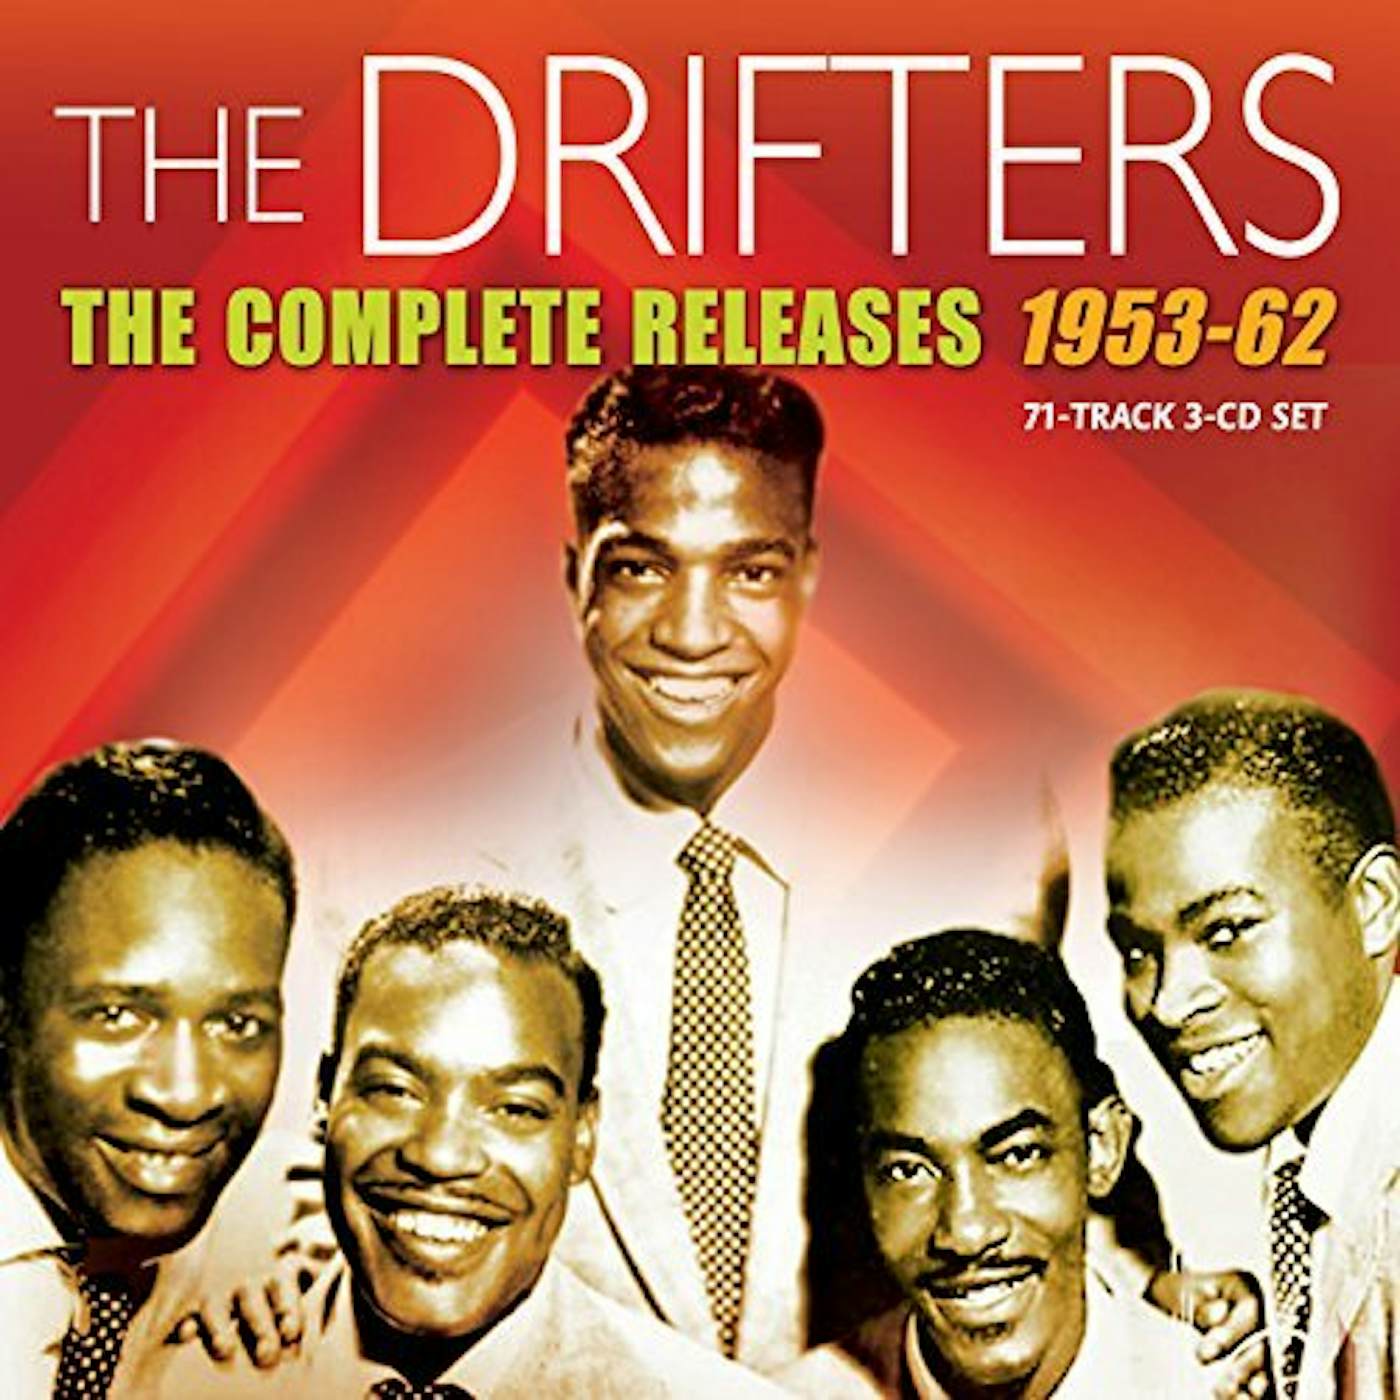 The Drifters COMPLETE RELEASES 1953-62 CD